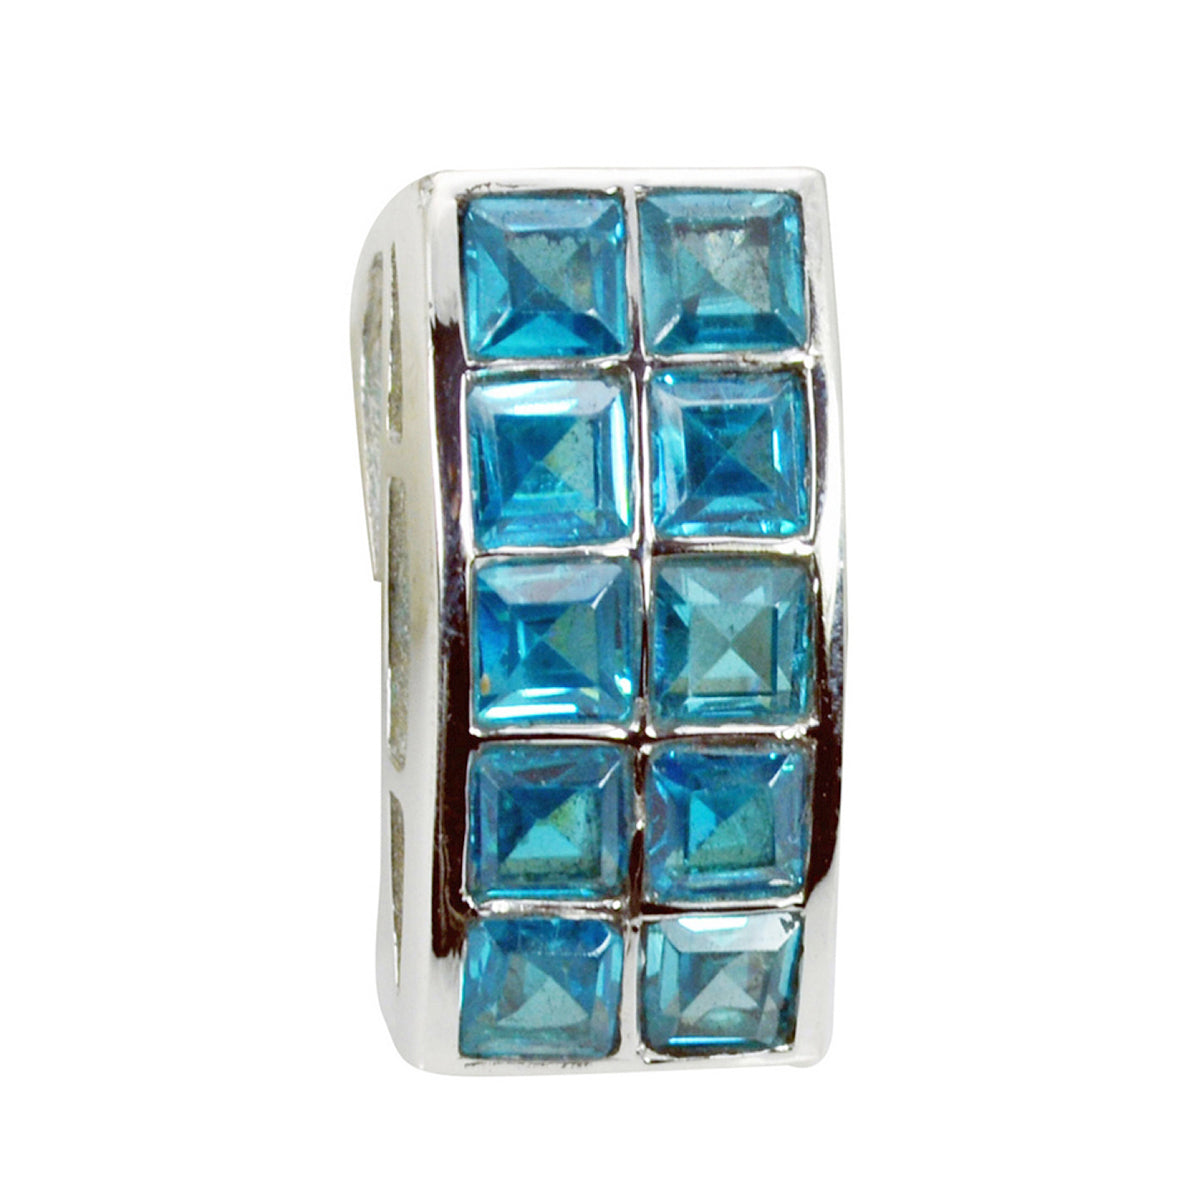 Riyo Gorgeous Gems Square Faceted Blue Blue Topaz Solid Silver Pendant Gift For Wedding